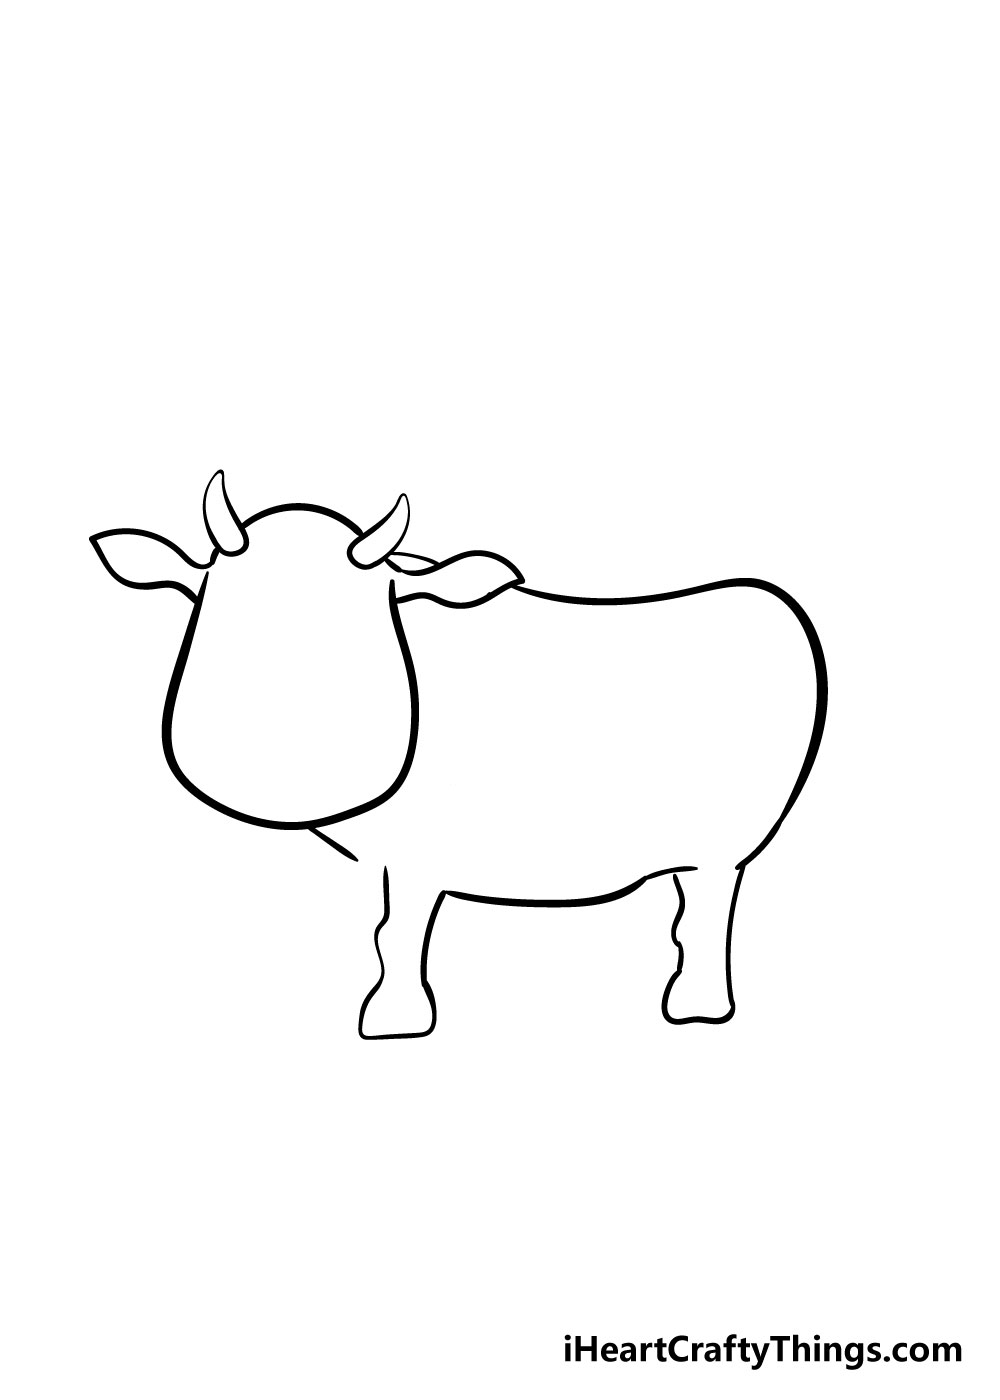 cow drawing step 5